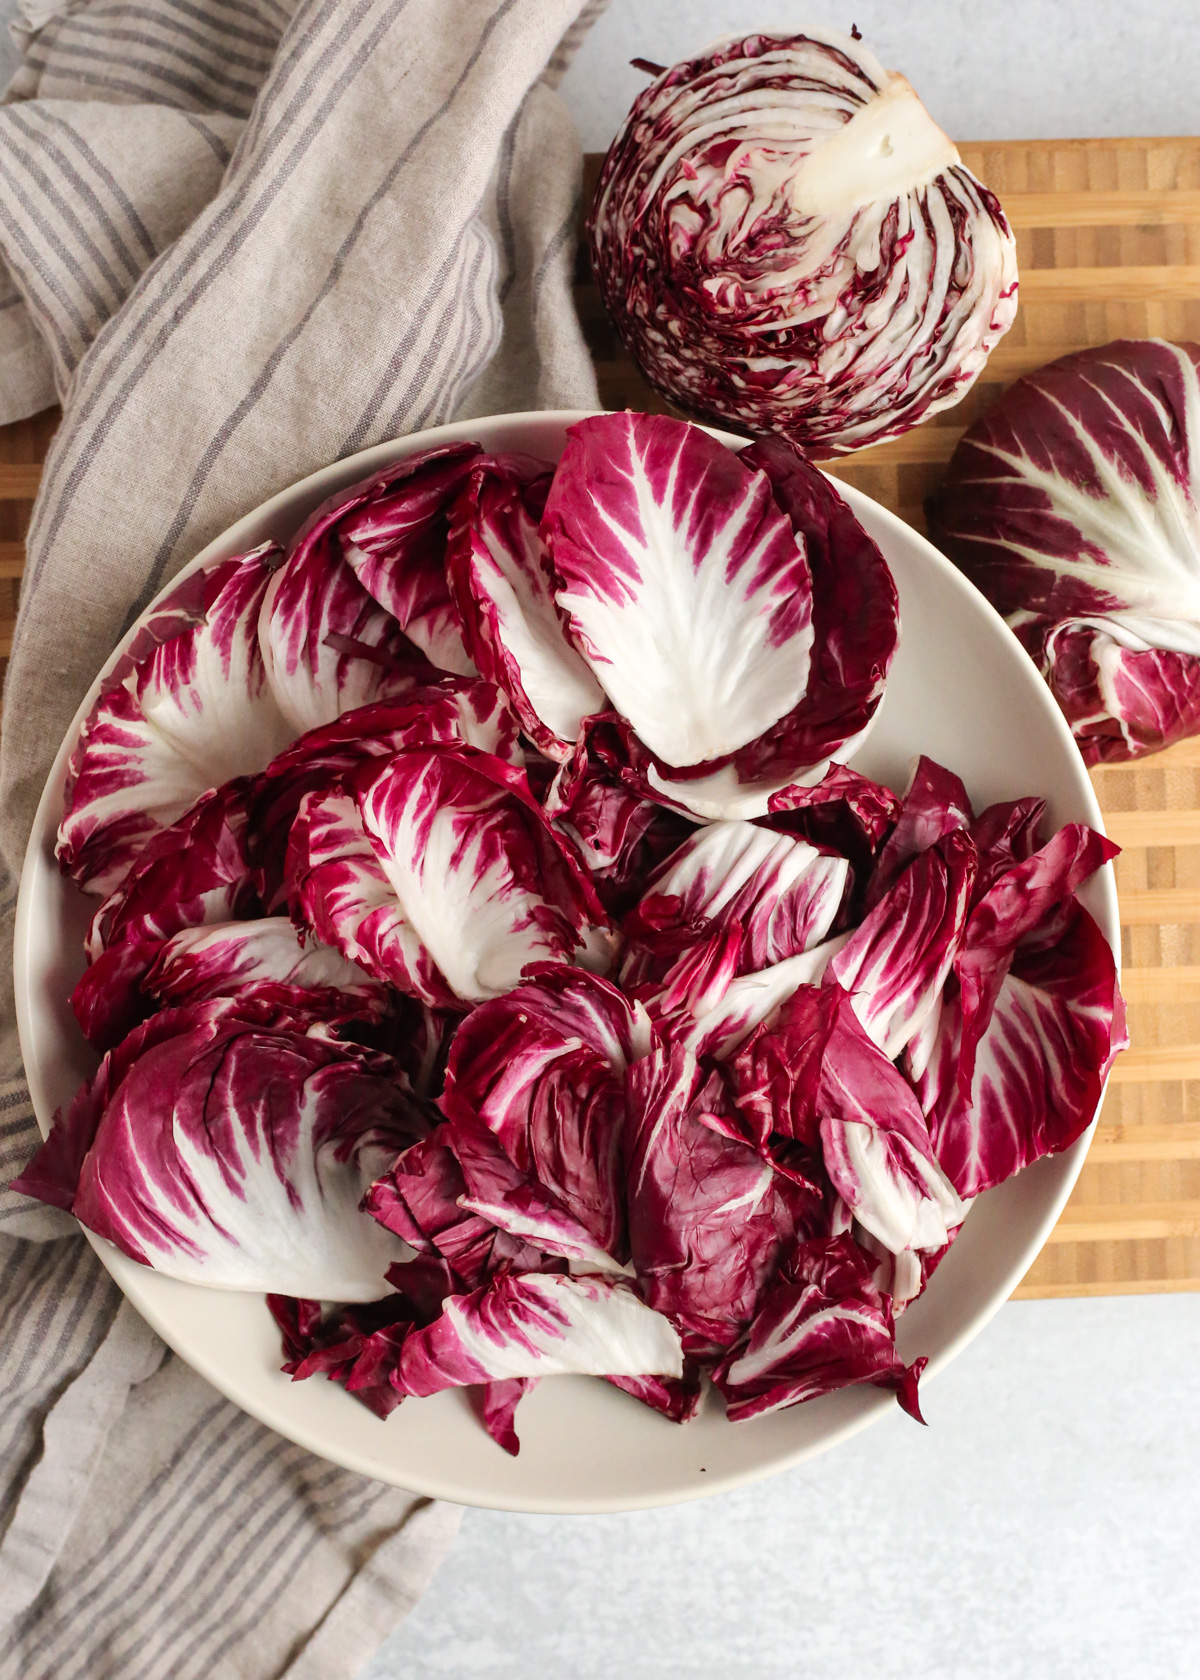 Overhead view of a large salad bowl filled with leaves of radicchio, arranged near another head of radicchio that is sliced in half